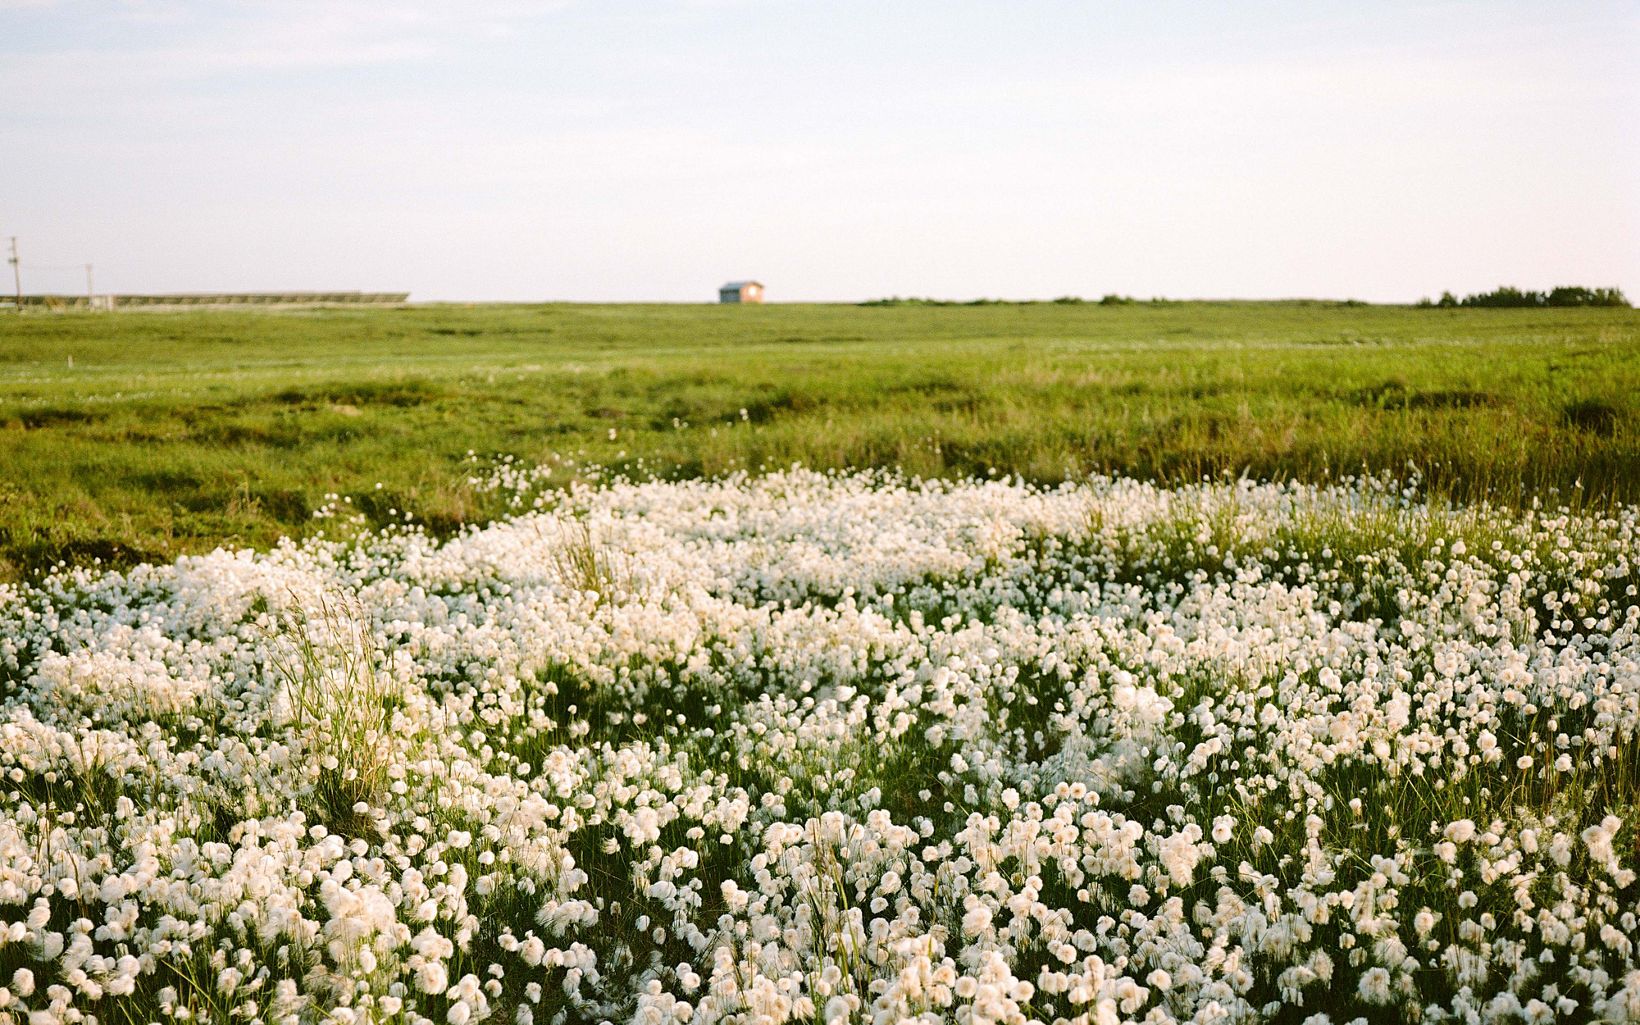 Field of white flowers spreading out into grassy field.